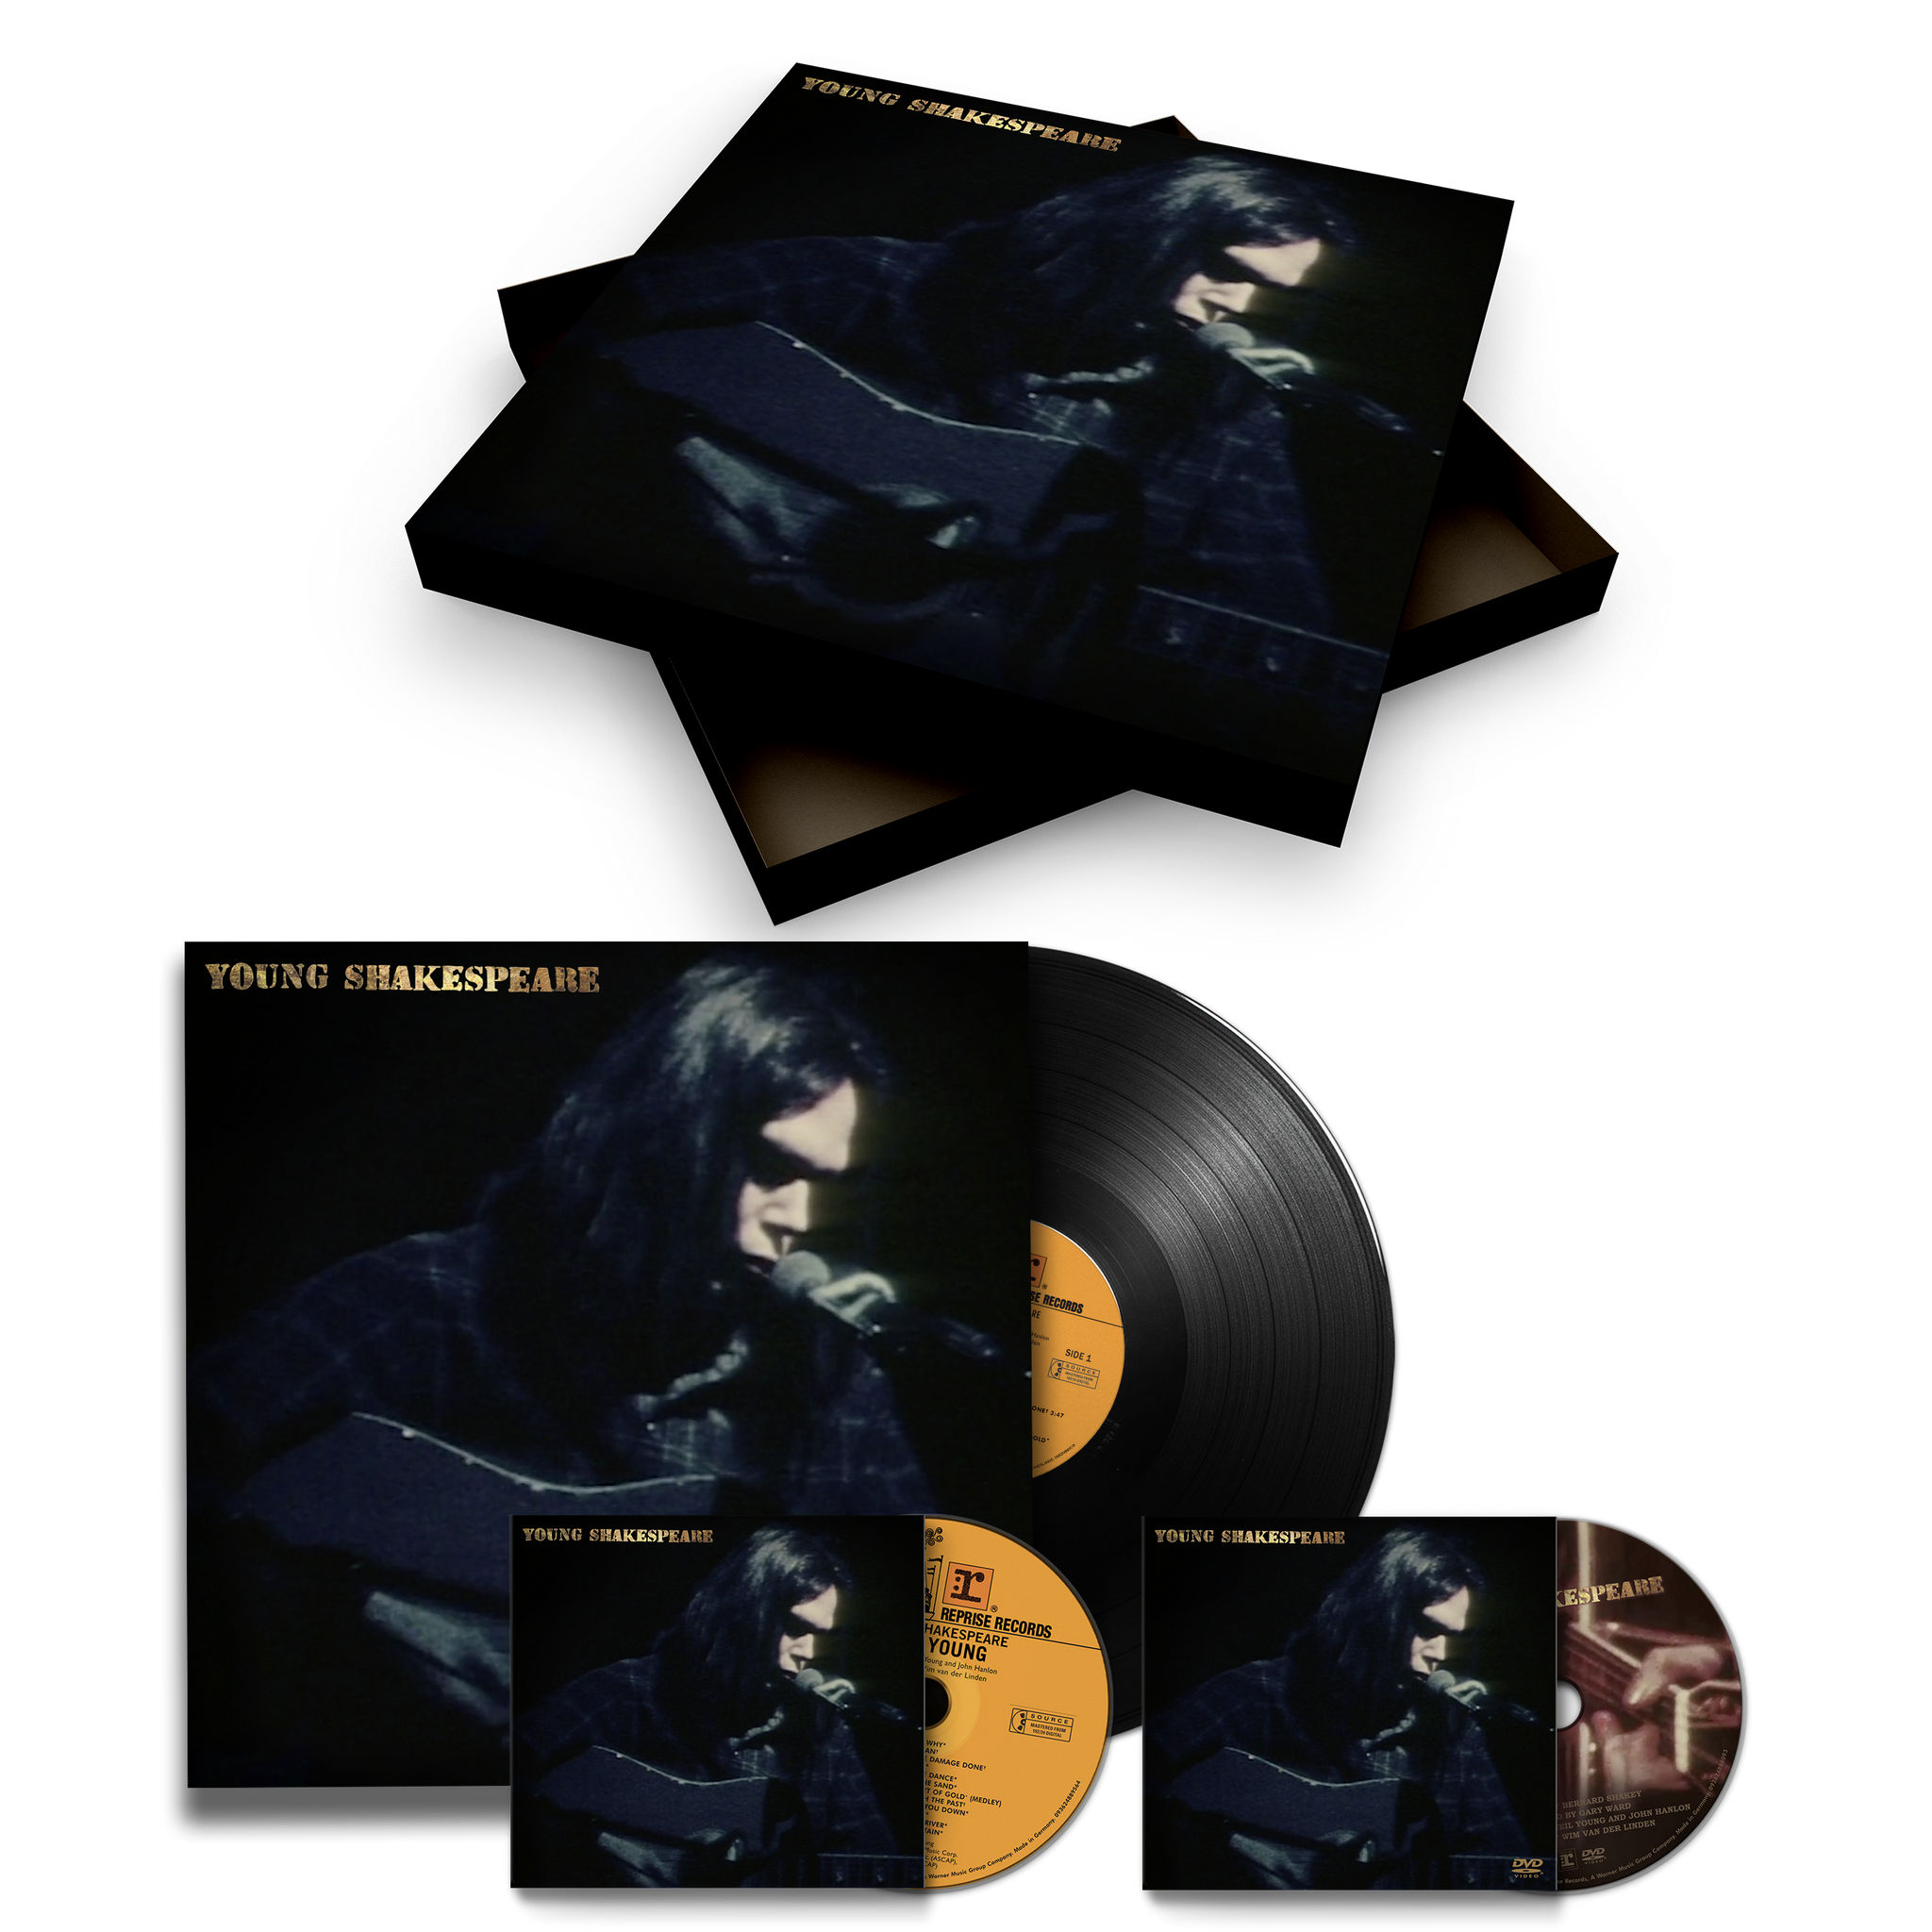 NEIL YOUNG - Young Shakespeare - LP/CD/DVD - Deluxe Boxset